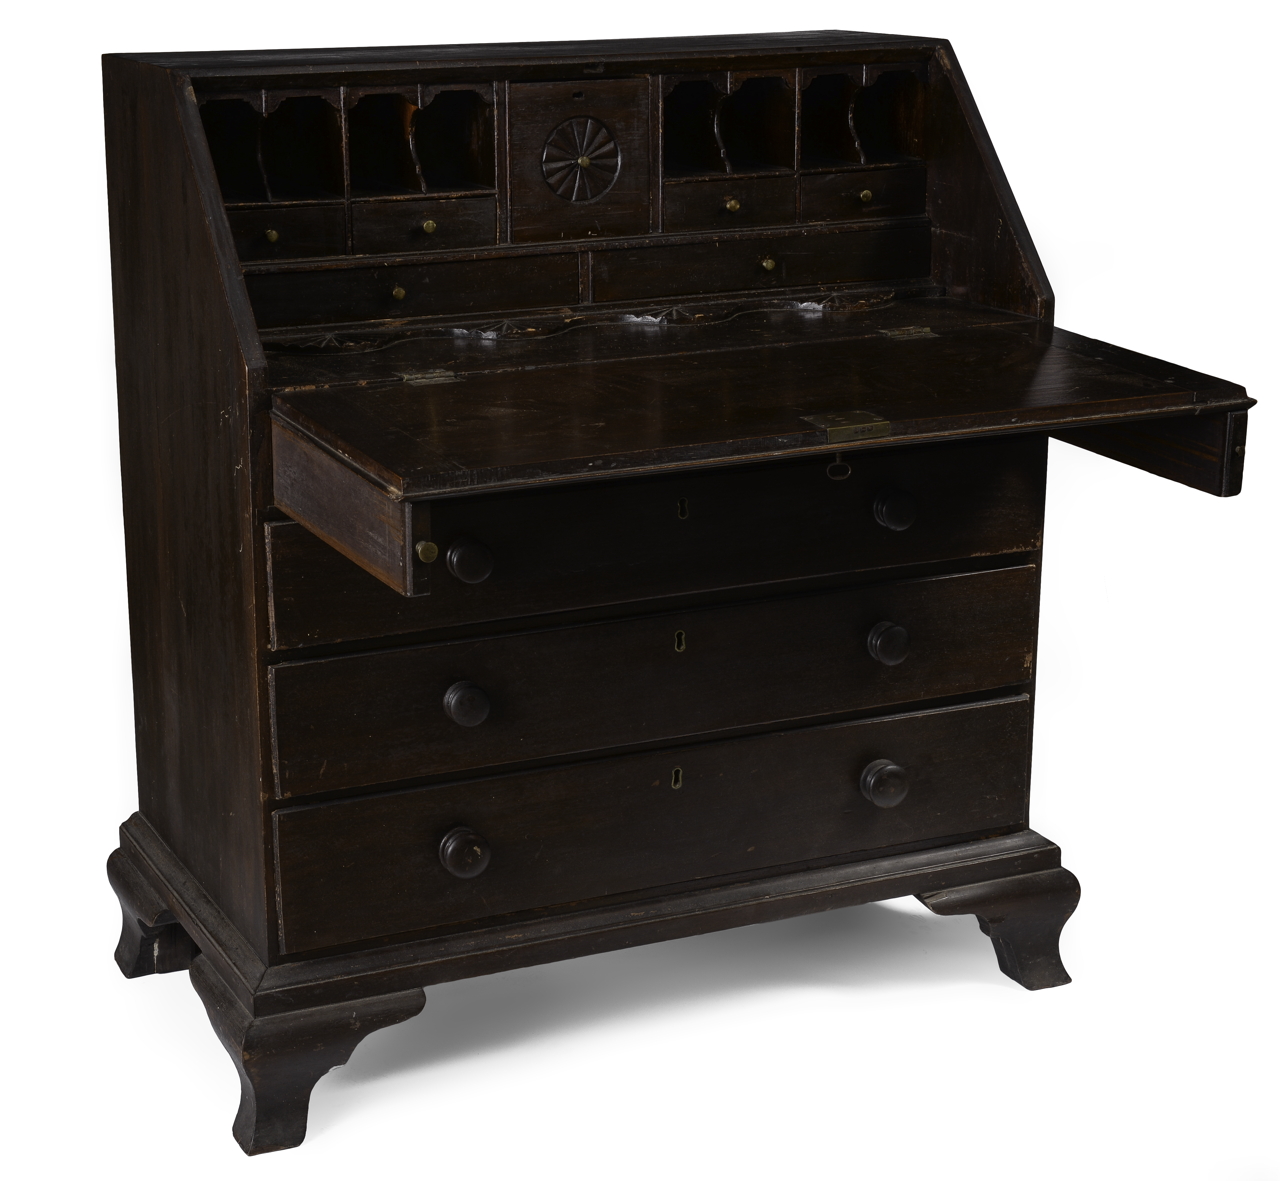 A very fine country Chippendale desk